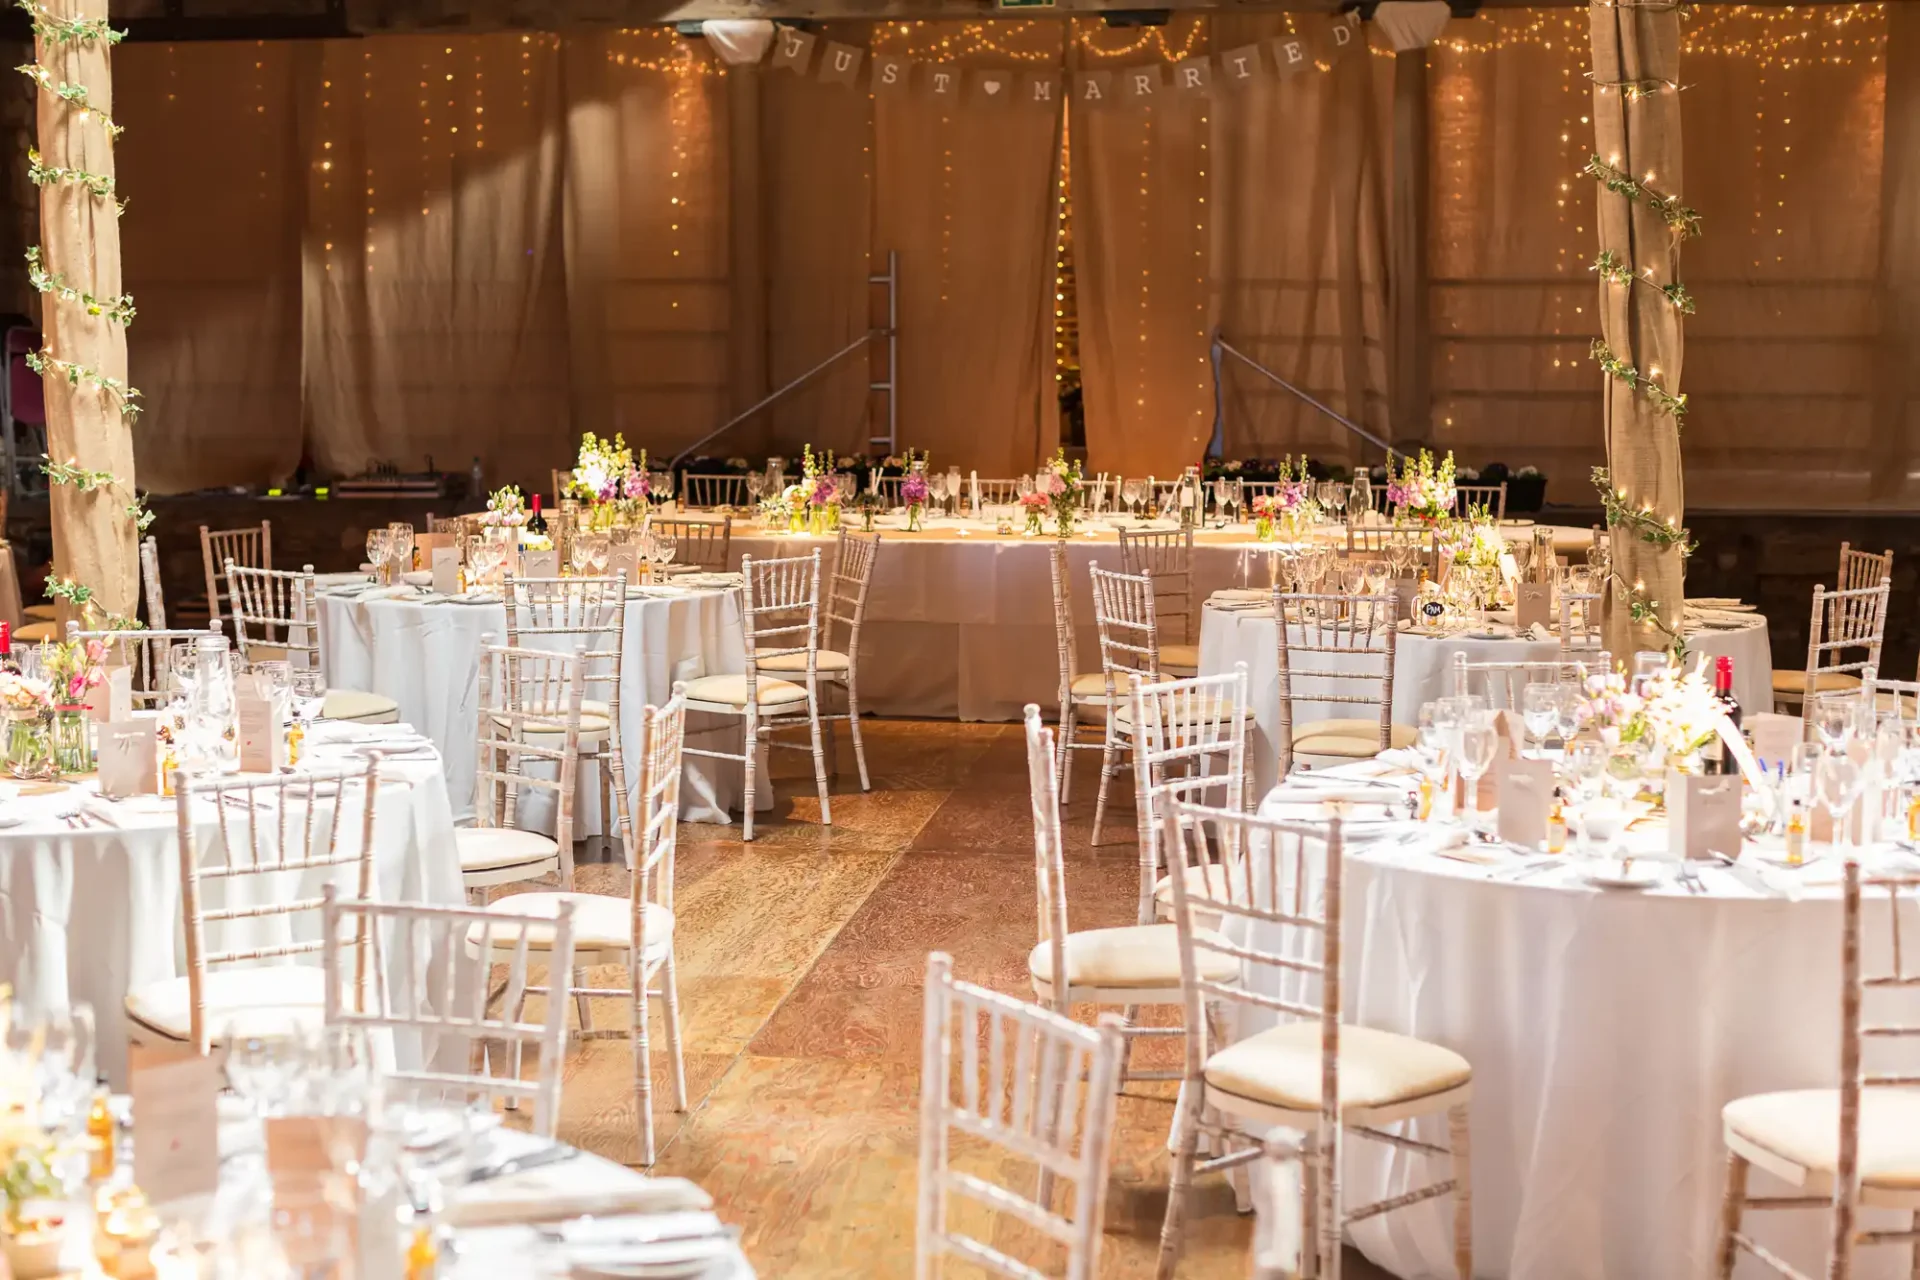 Elegant wedding reception hall decorated with white chairs, floral centerpieces, and string lights, with a "just married" sign in the background.